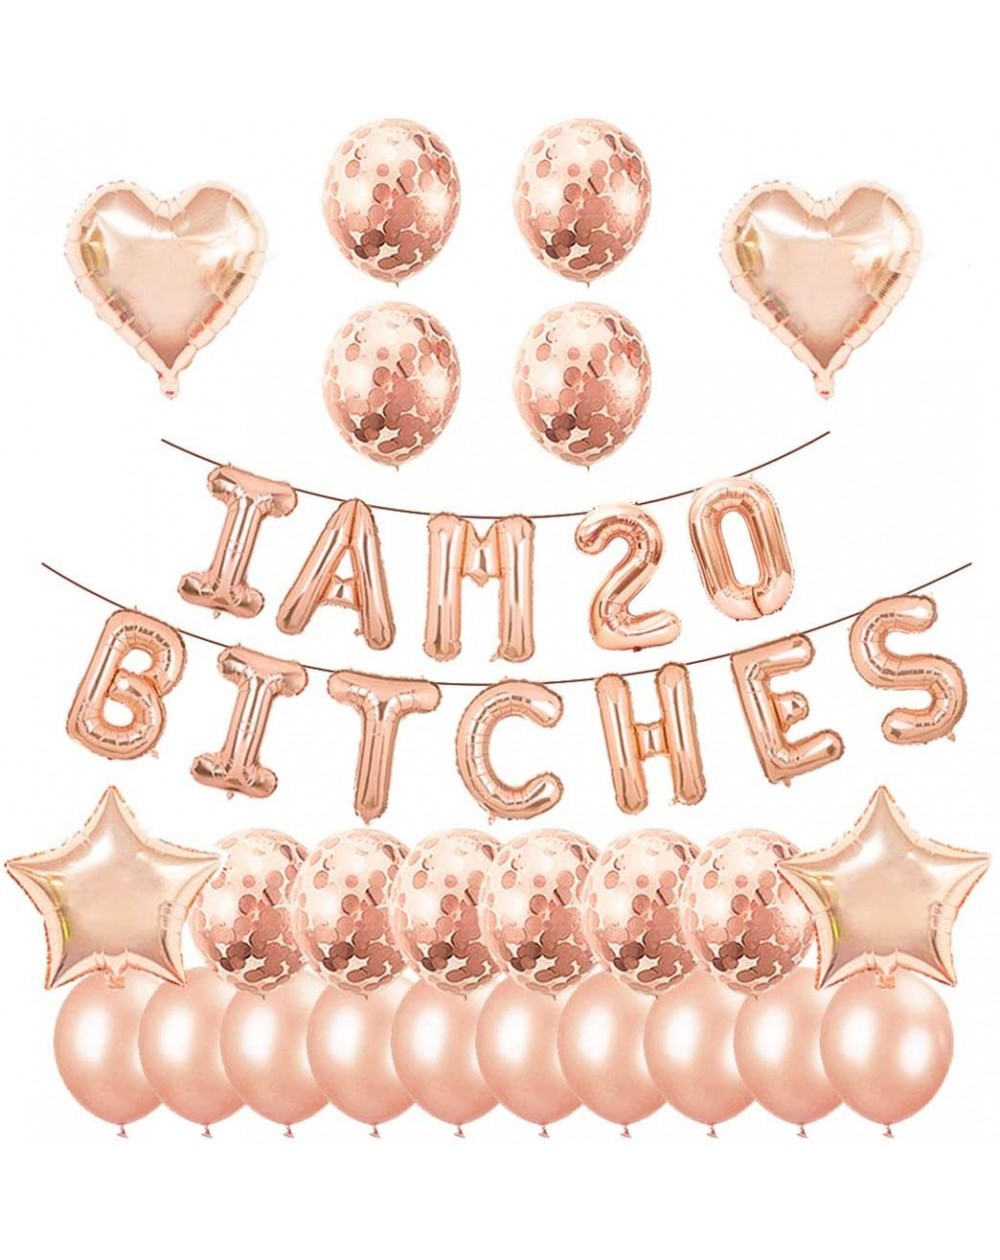 Balloons 20th Birthday Party Set-I am 20 Bitches Funny Banner Confetti Rose Gold Balloons for Girls 20 Years Old Birthday Dec...